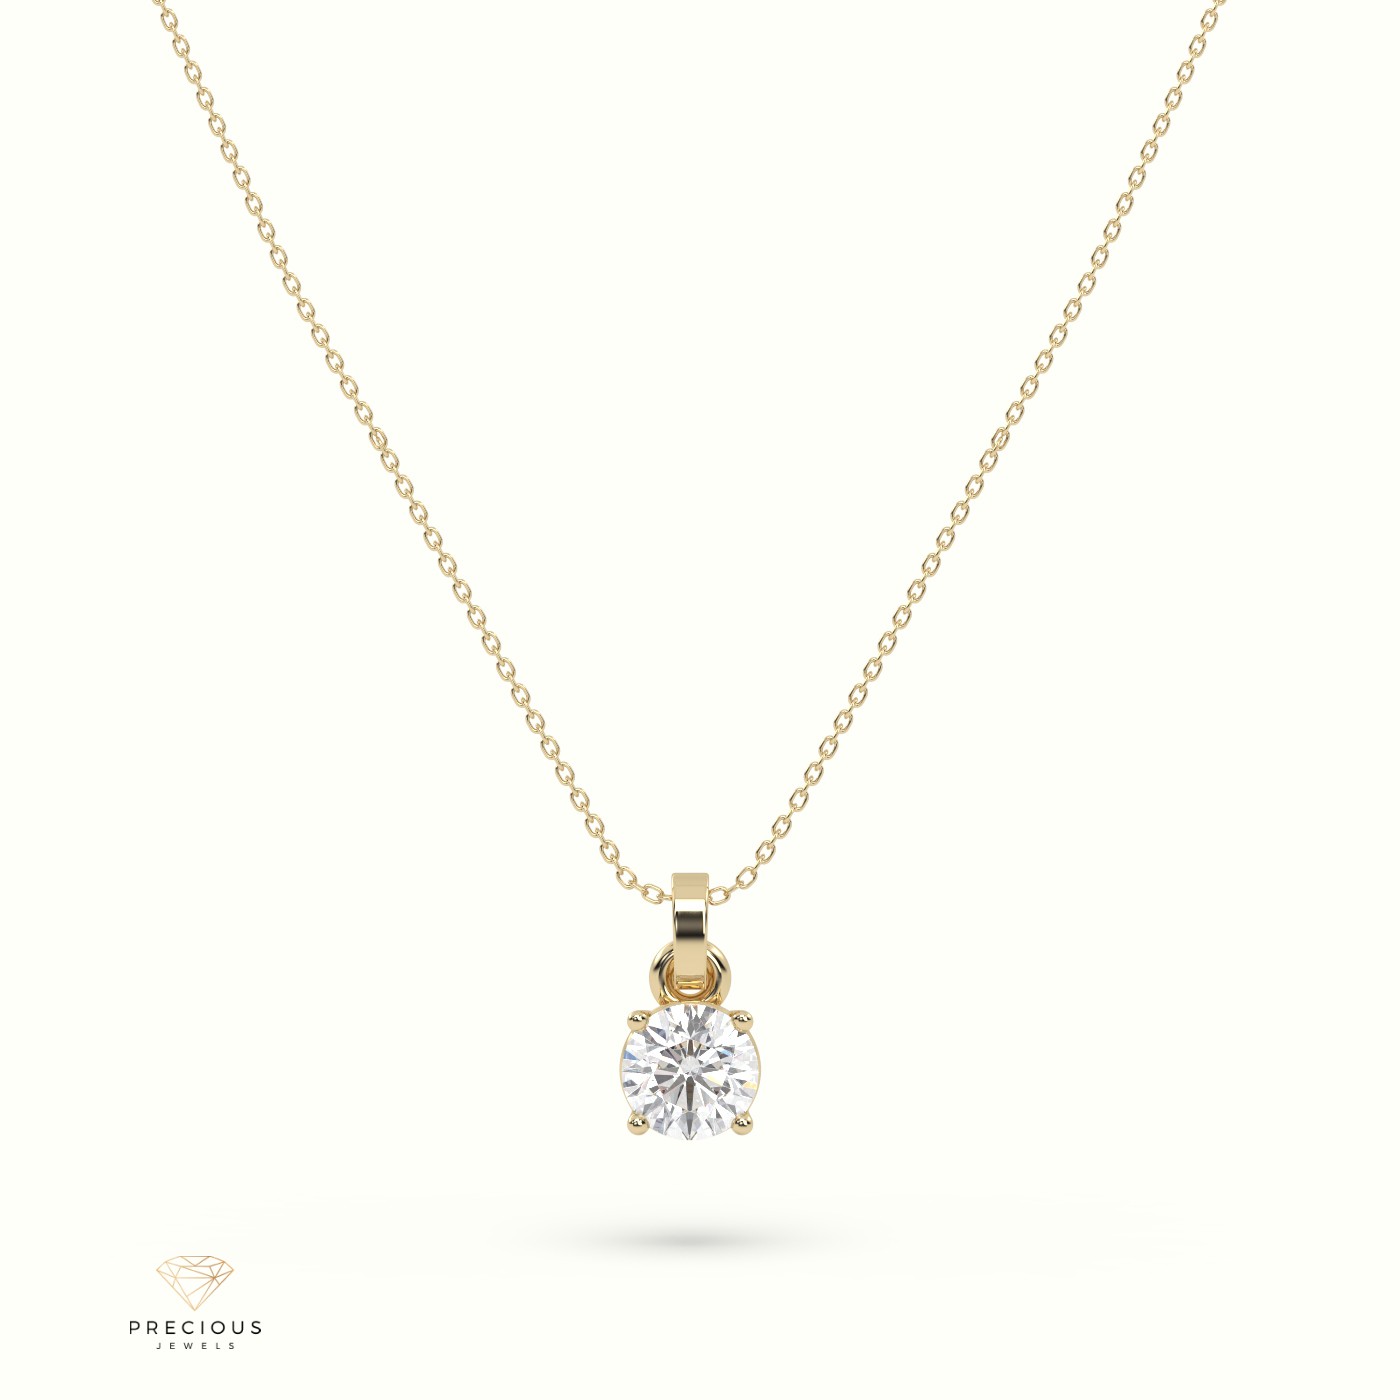 18k yellow gold certified diamond solitair pendant 0.30 ct to 1.50 ct si1 quality g color round 4 prongs